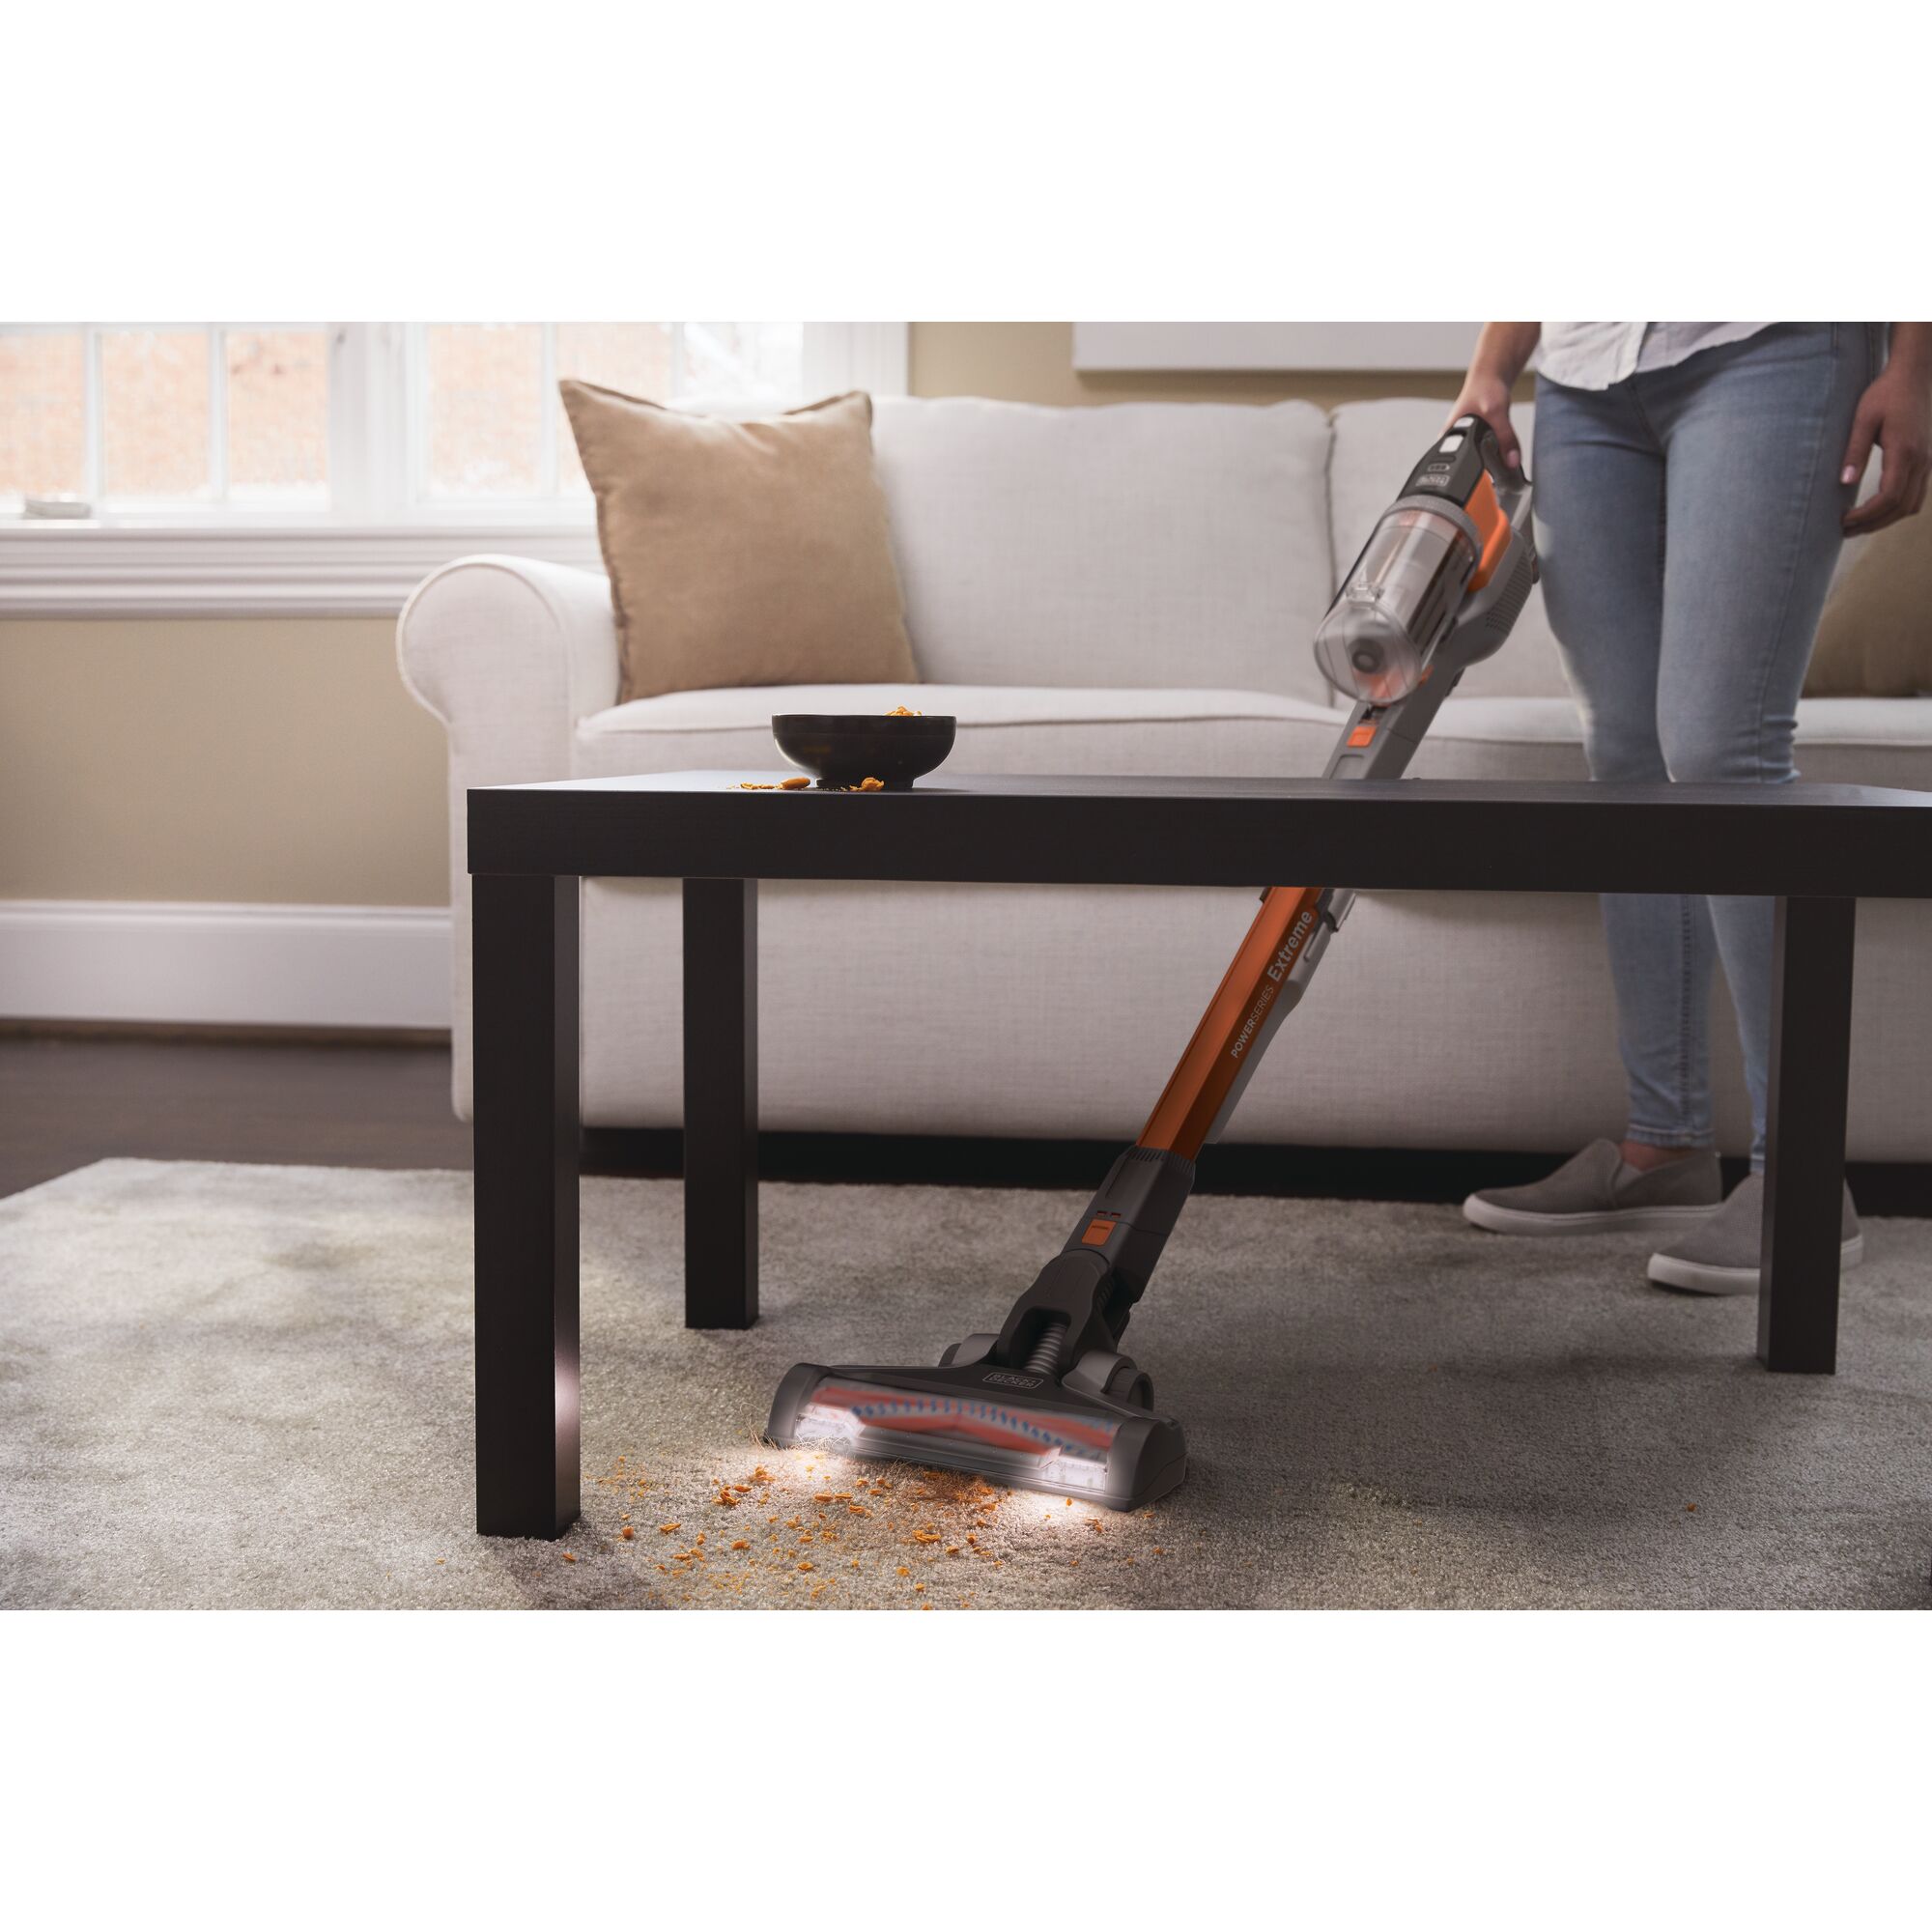 POWER SERIES Extreme cordless stick vacuum cleaner being used by a person to clean carpet under the table.